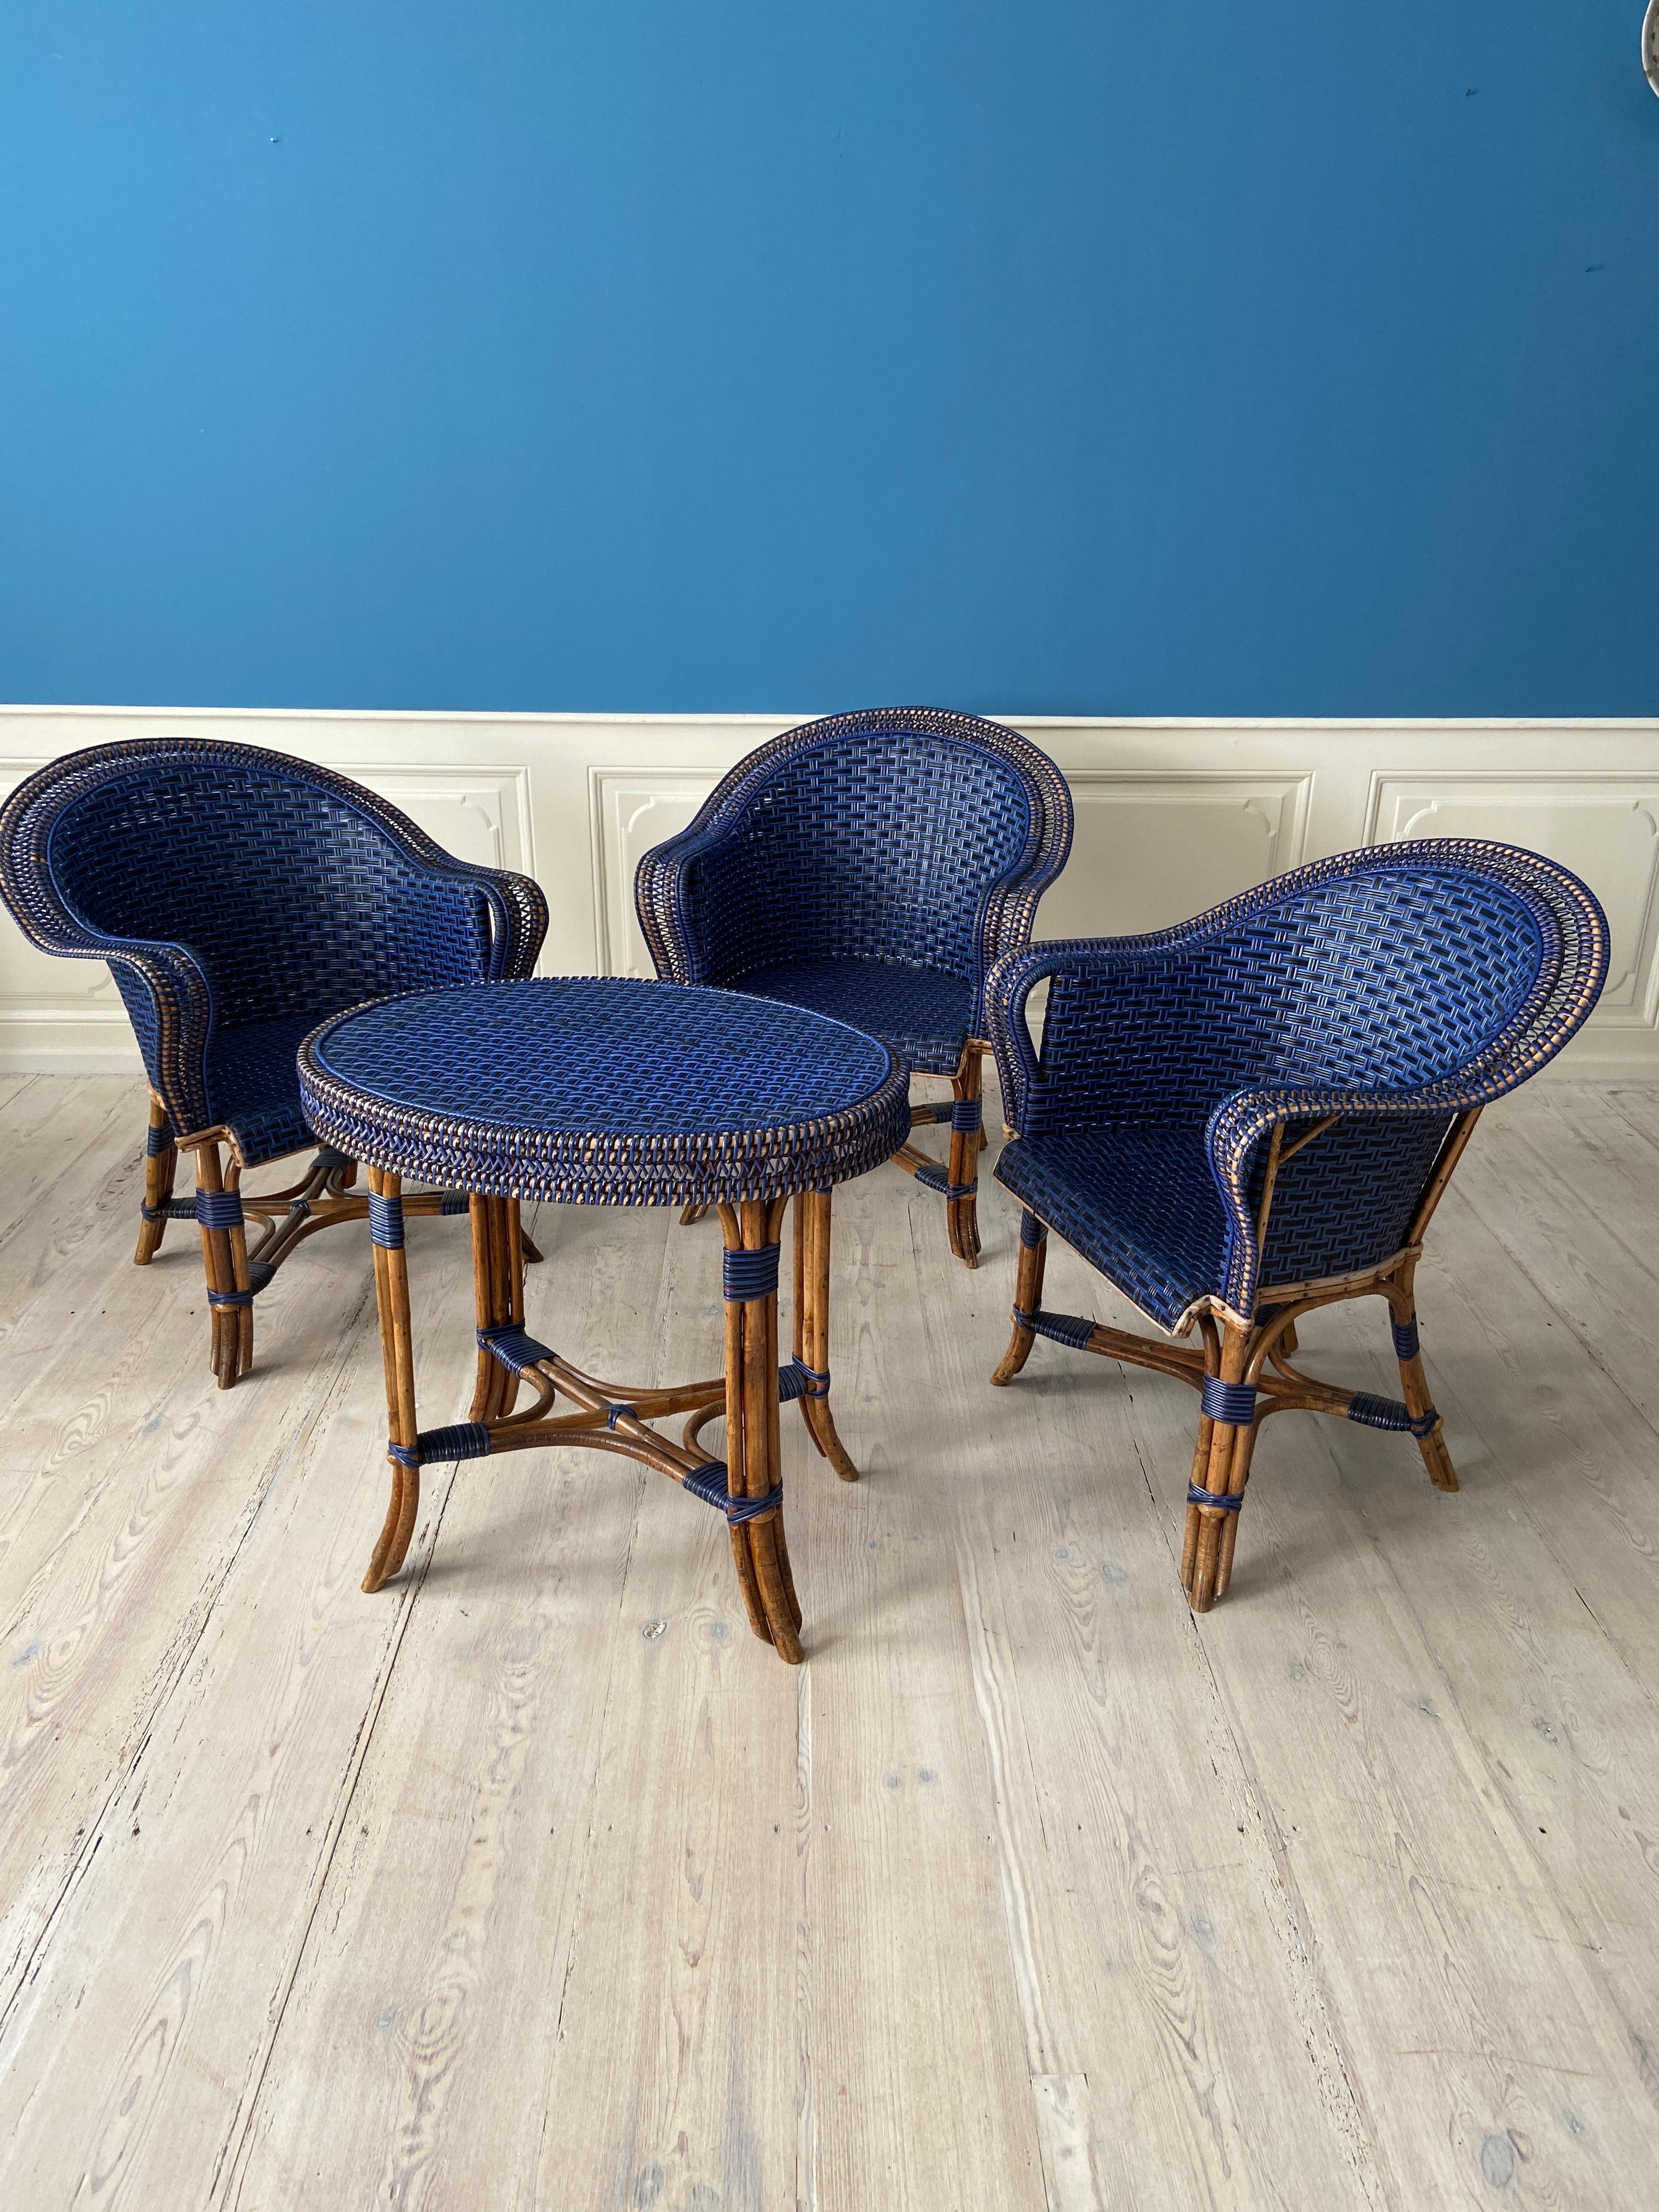 French Vintage Complete Rattan Furniture Set in Black and Blue, France, 20th Century